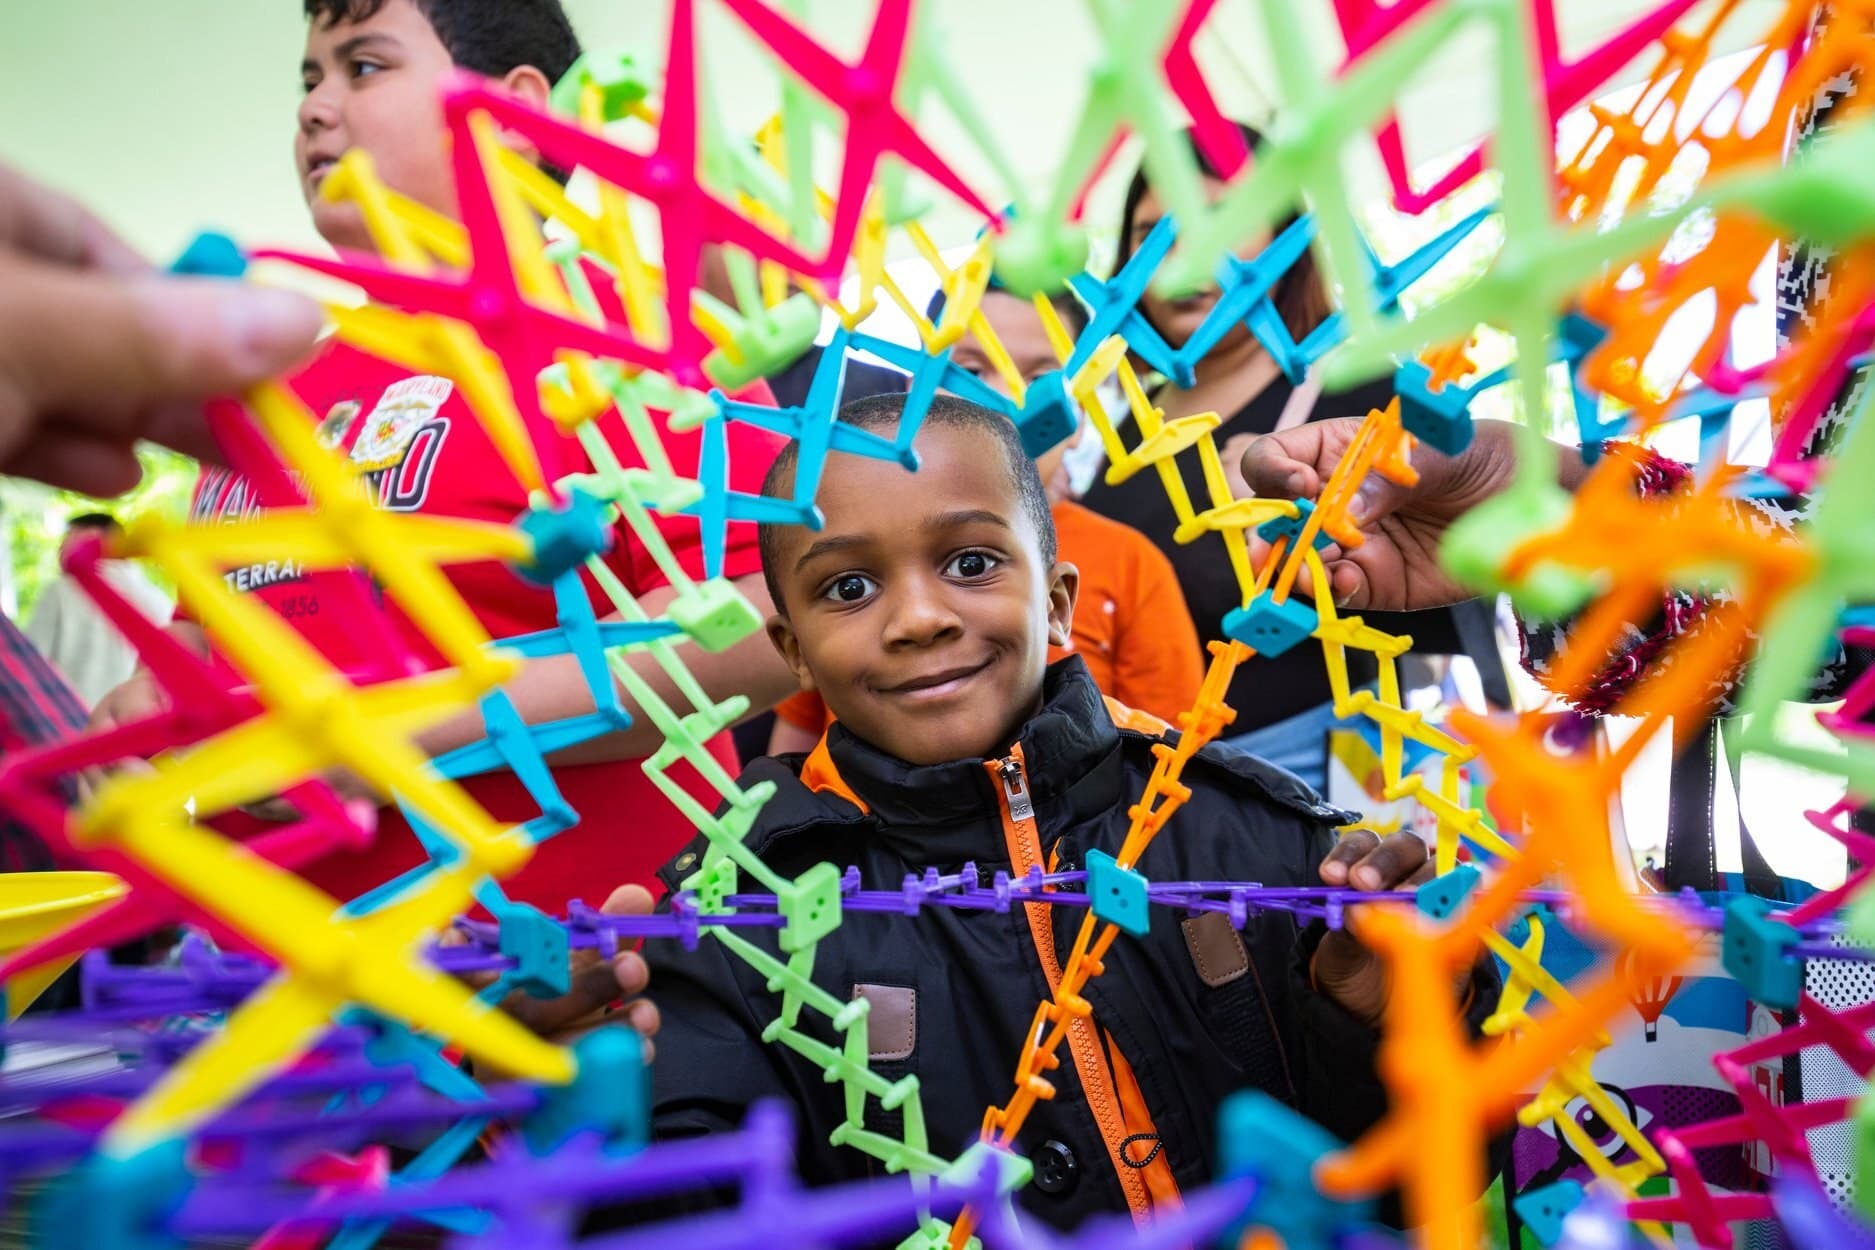 A young person sits on the other side of a very colorful expanded Hoberman sphere looking straight at the camera